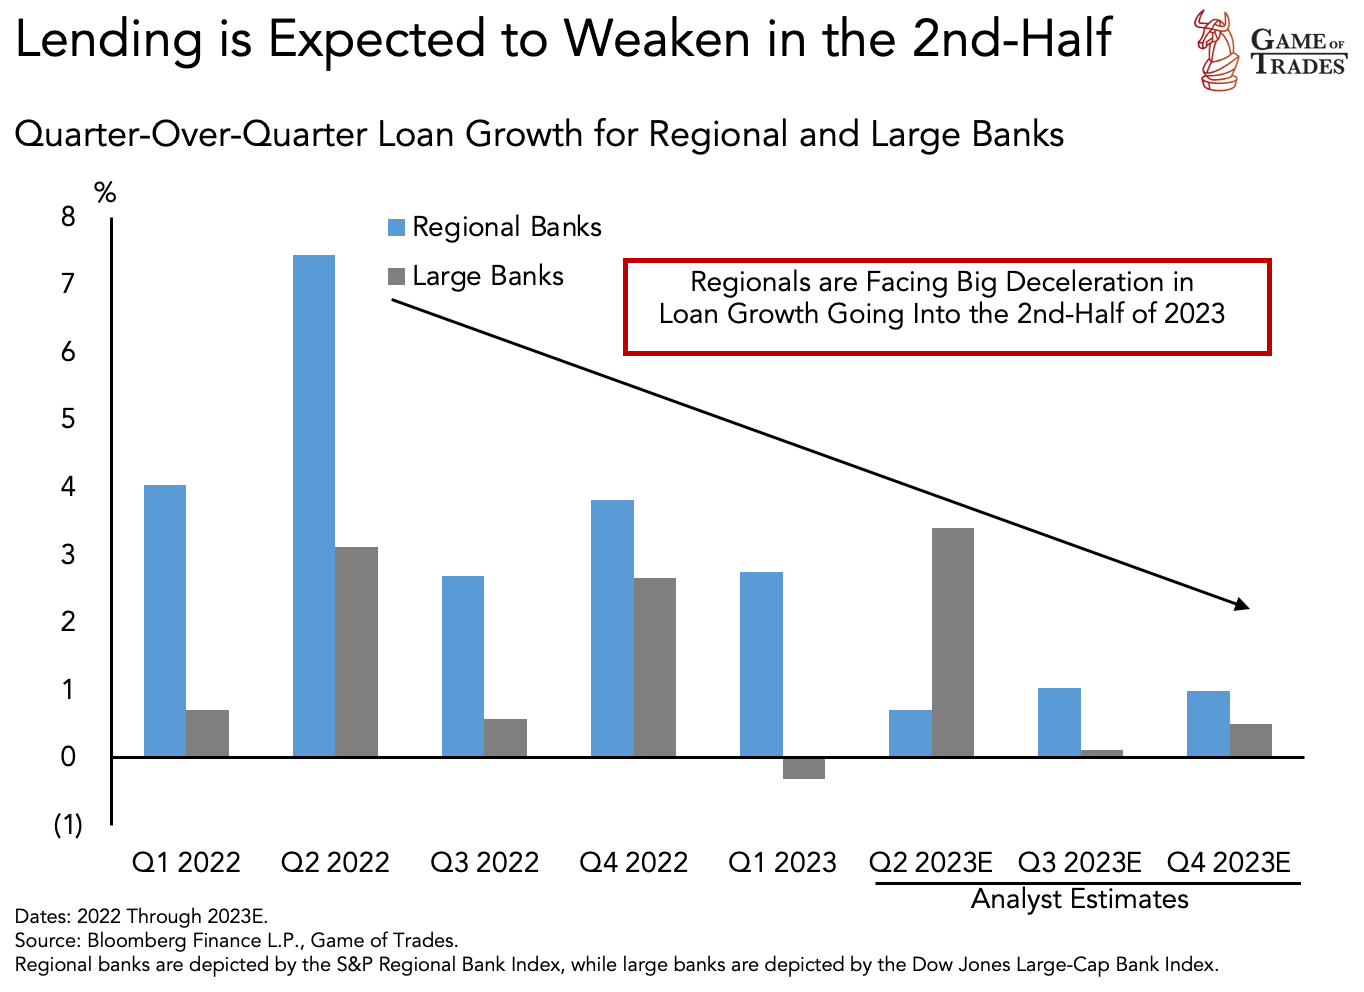 Loan Growth for regional and large banks